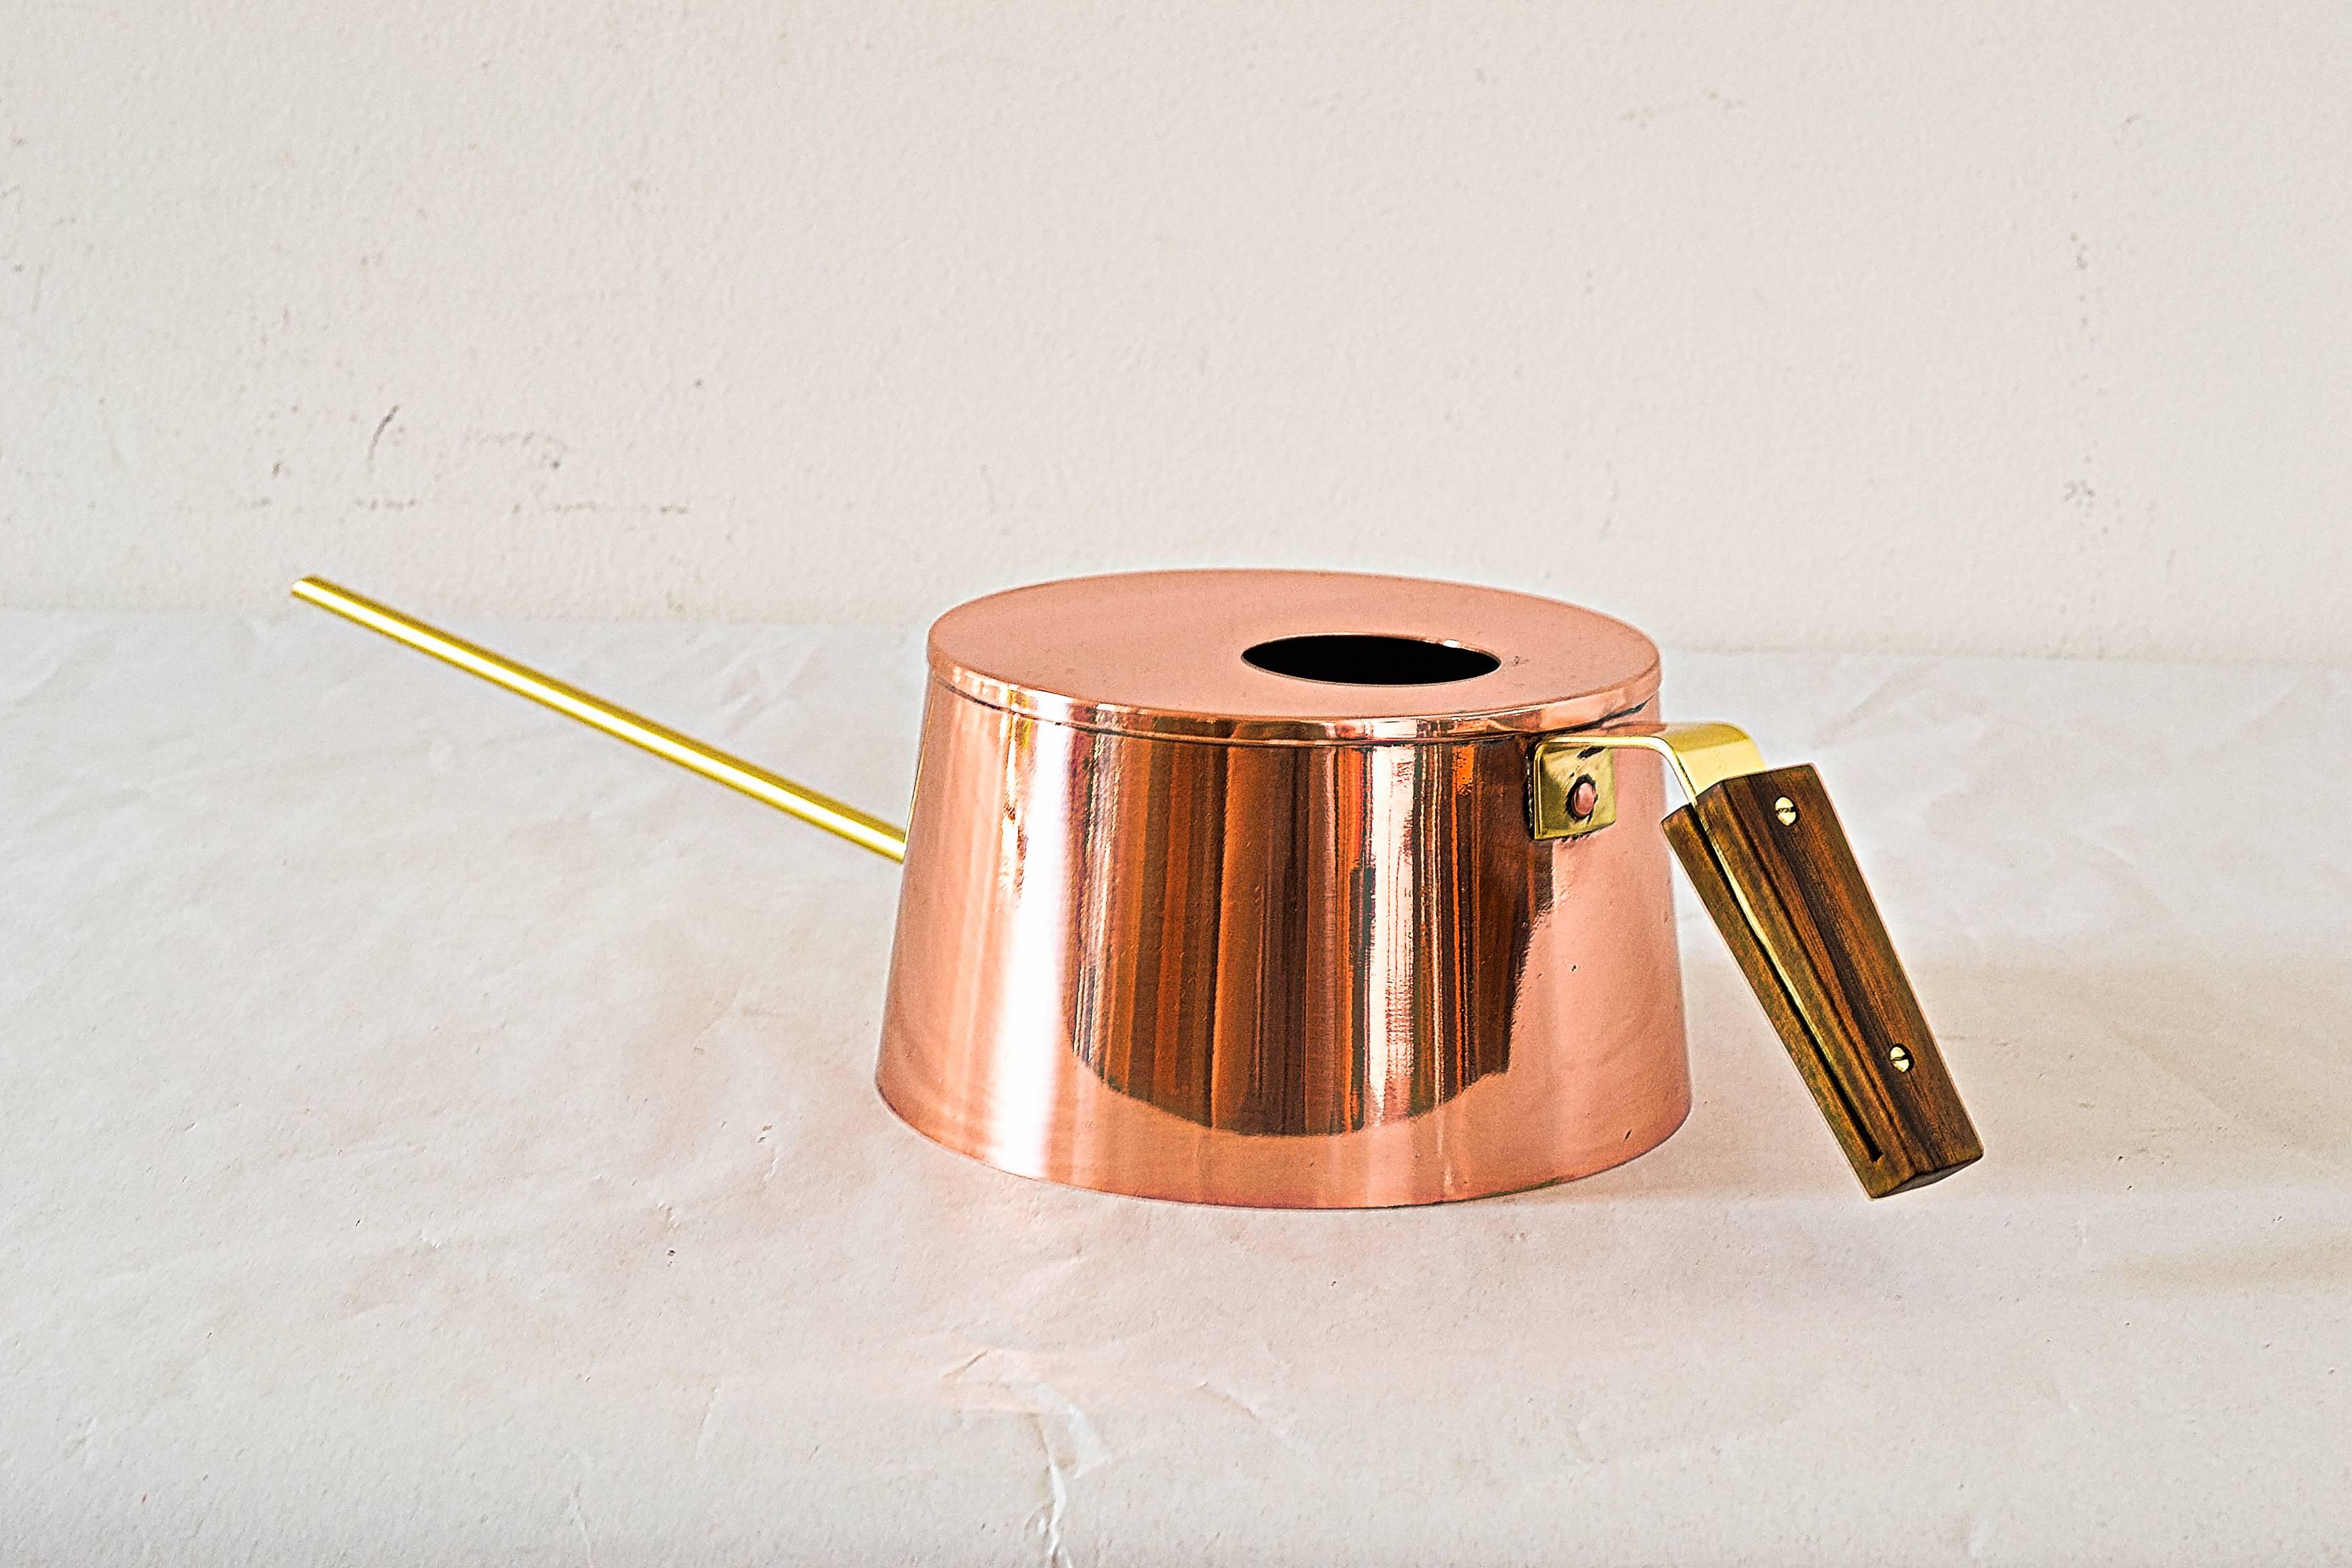 Watering can 
Polished and stove enameled.
Copper and brass.